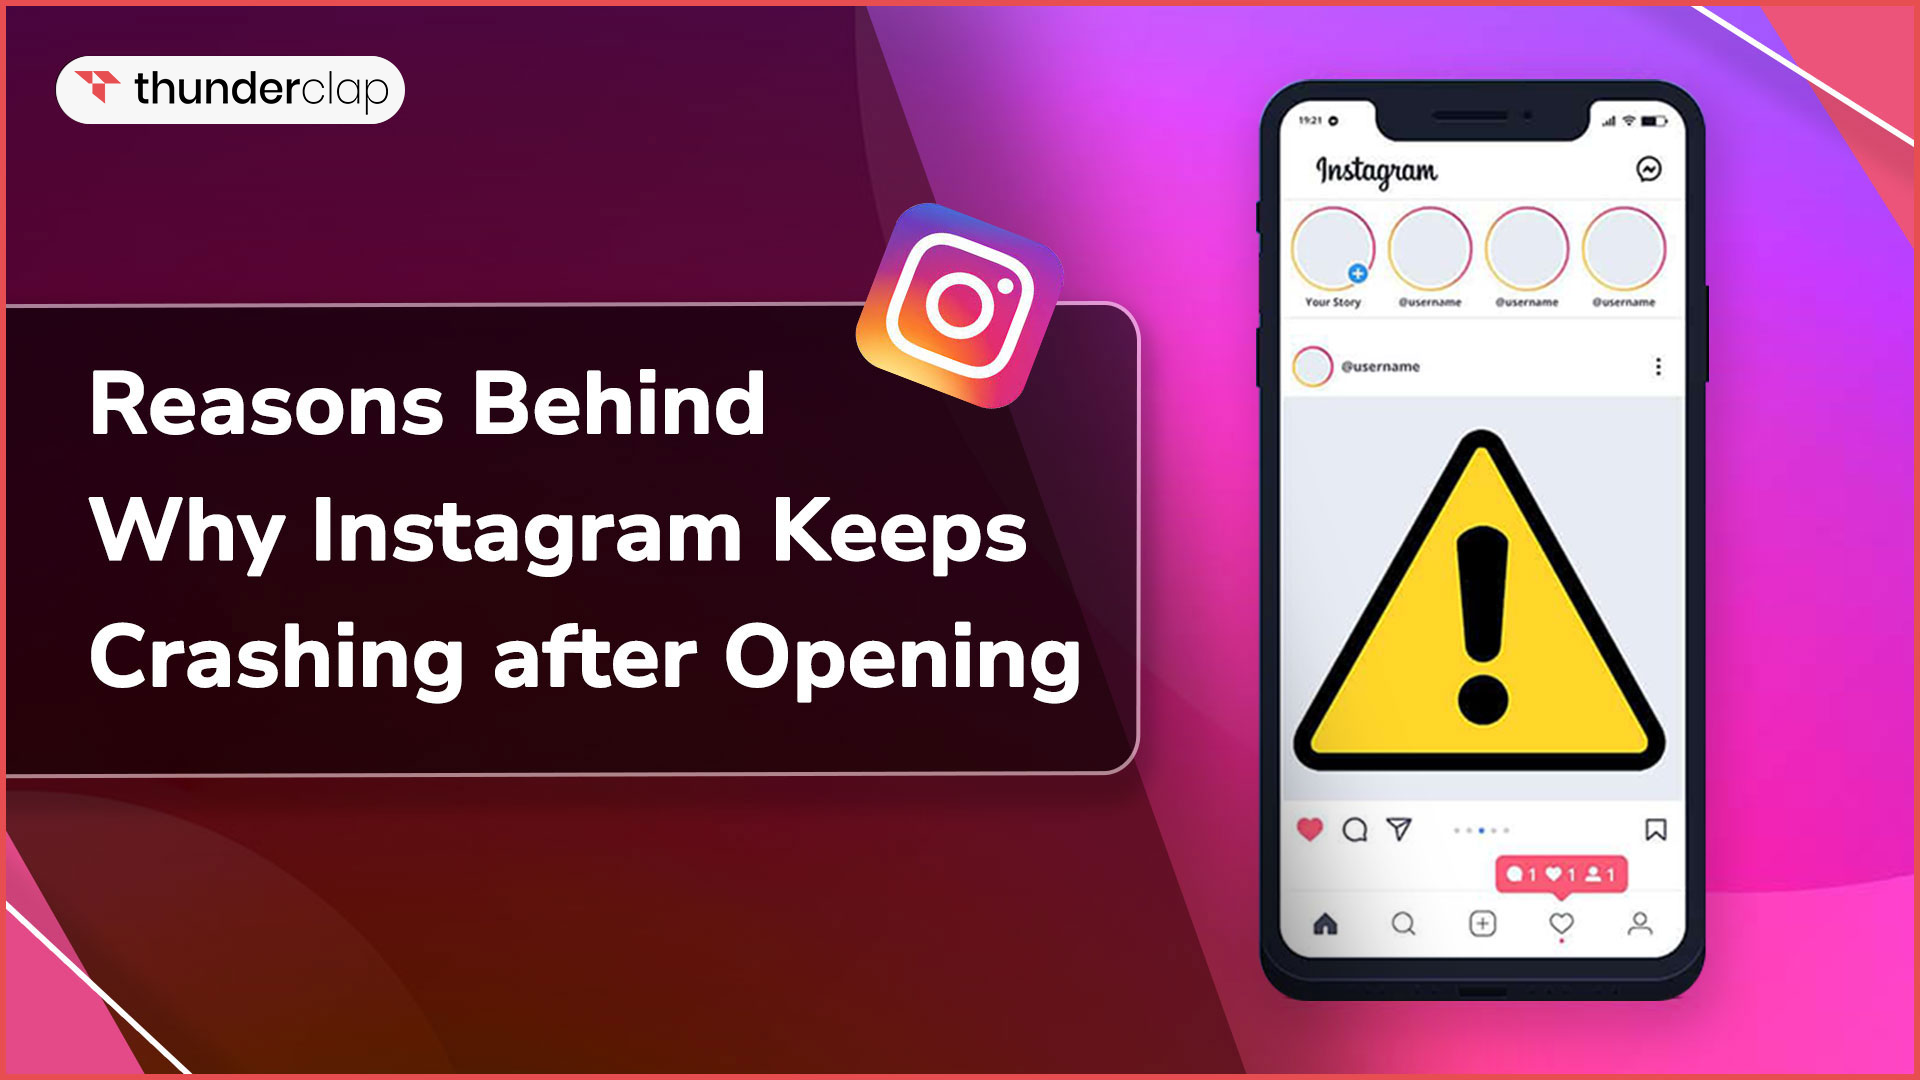 Reasons Behind Why Instagram Keeps Crashing After Opening